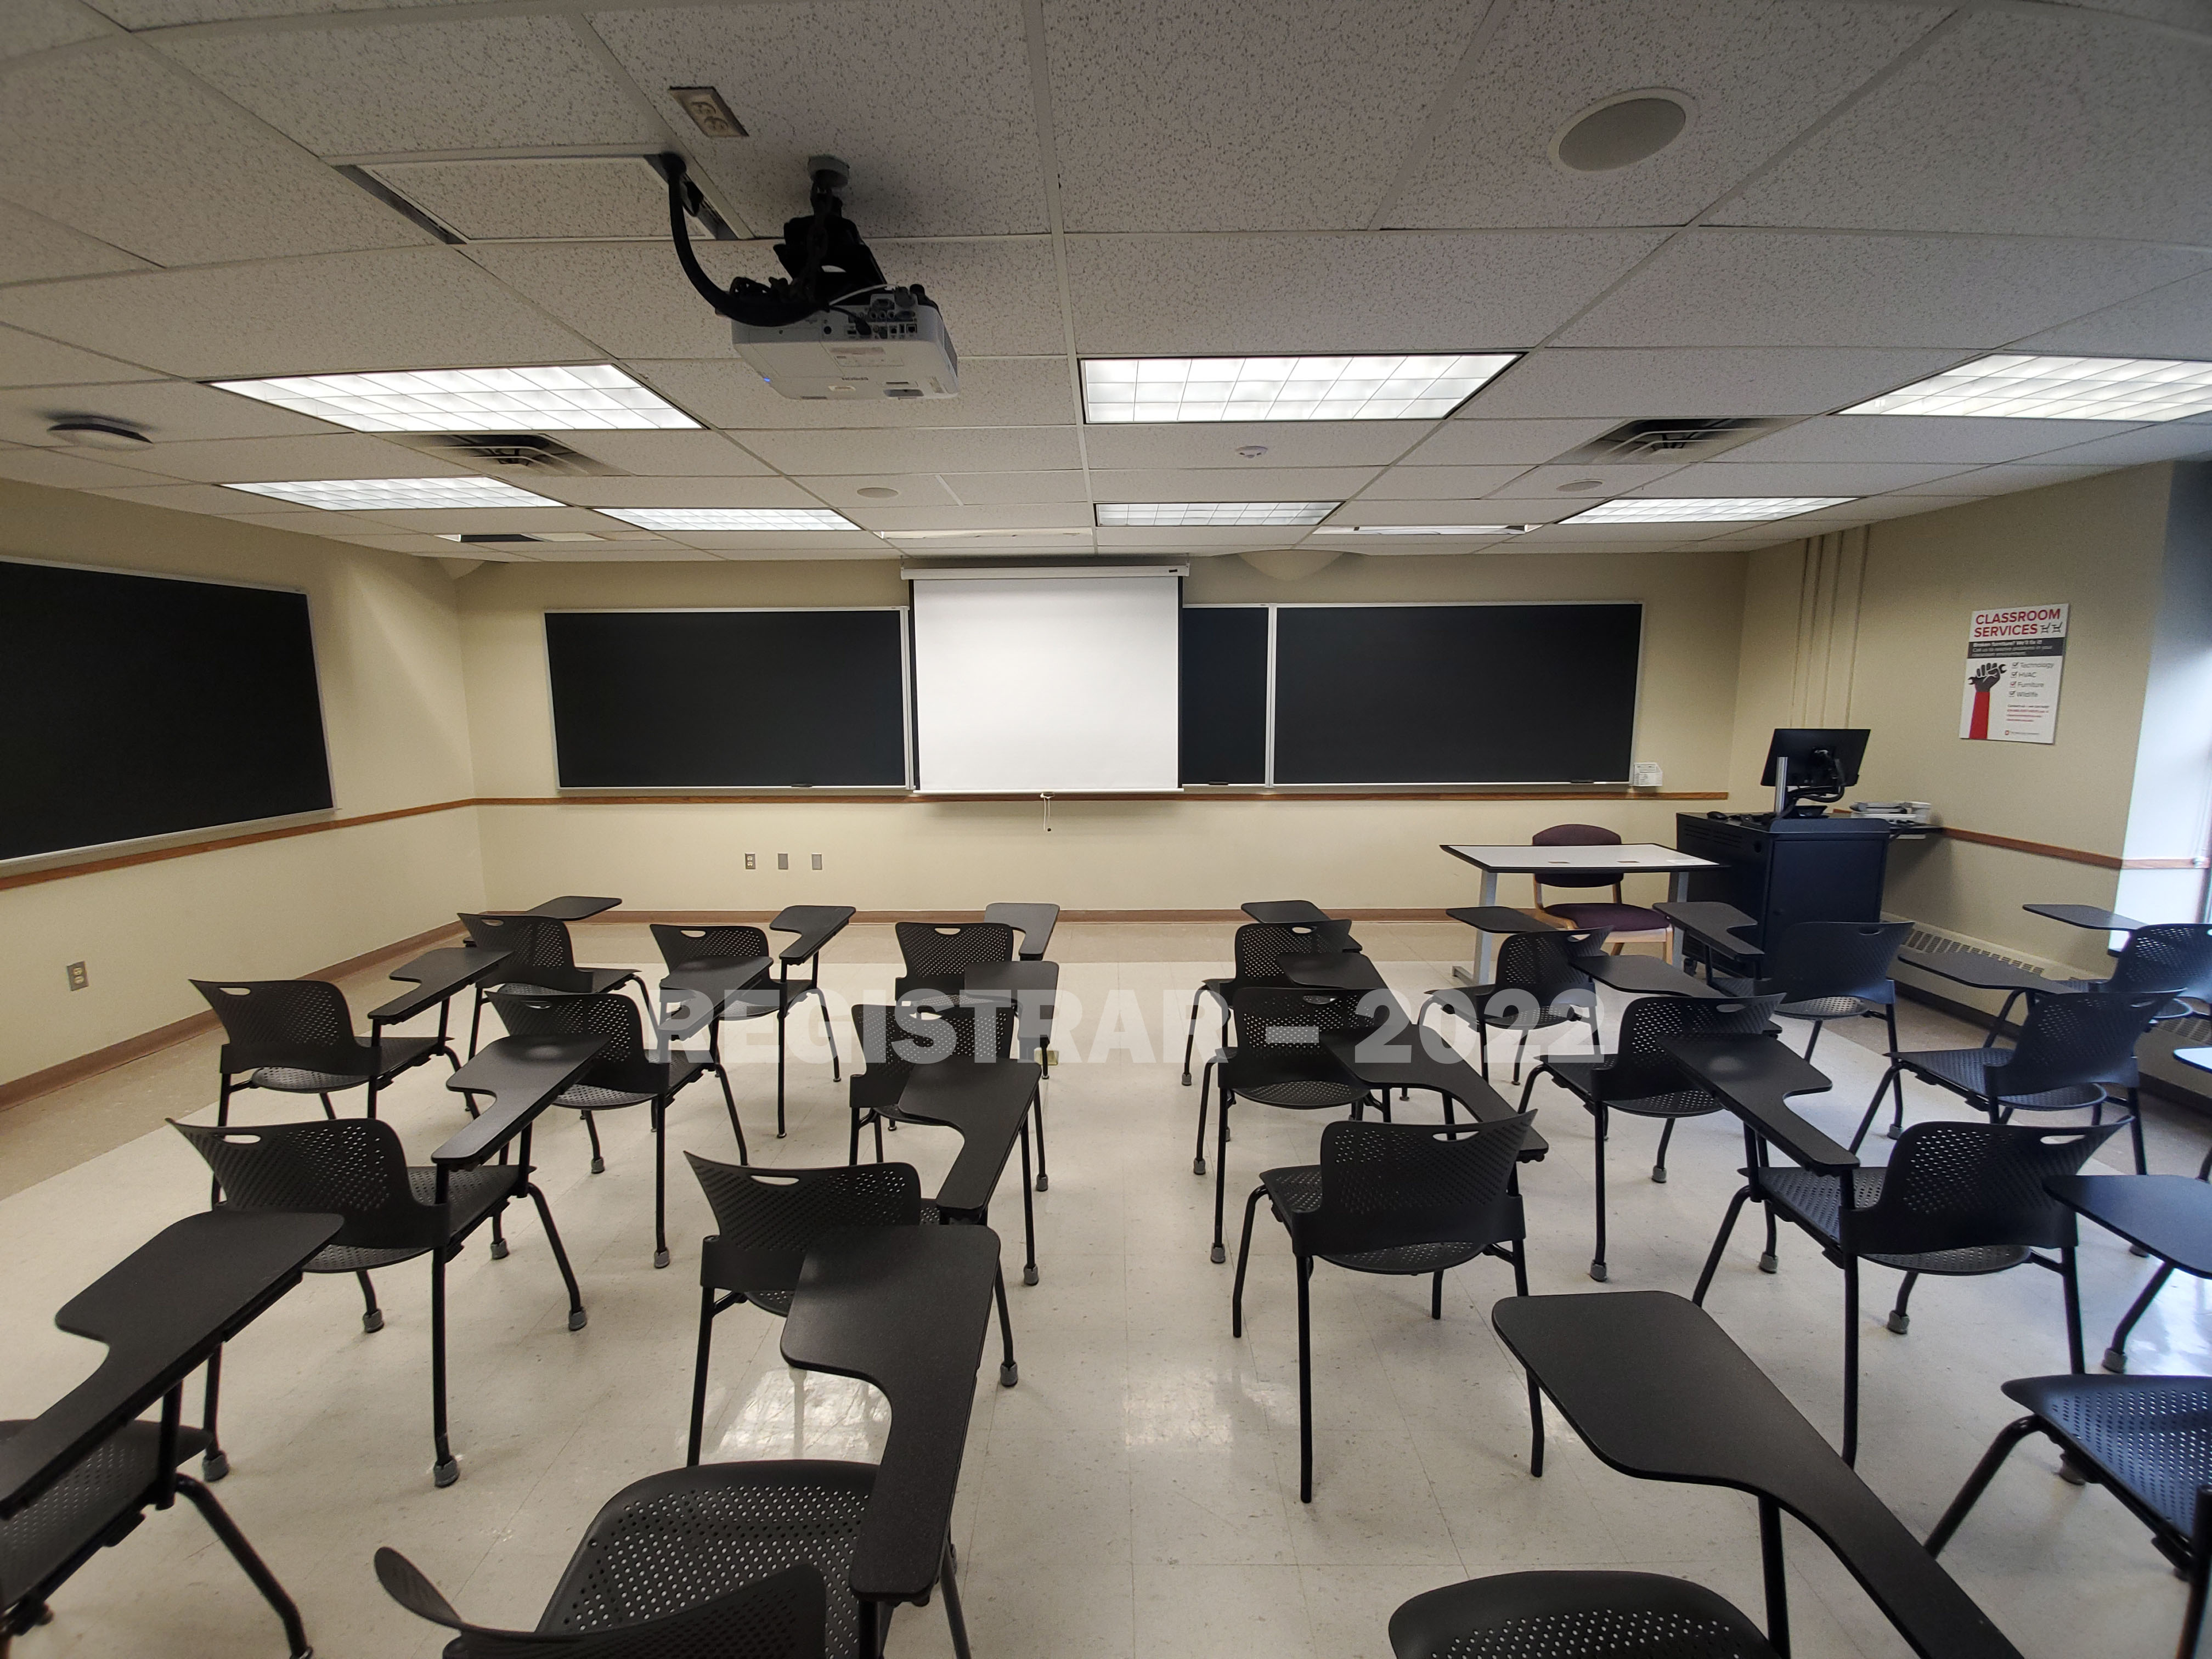 Enarson Classroom Building room 226 ultra wide angle view from the back of the room with projector screen down